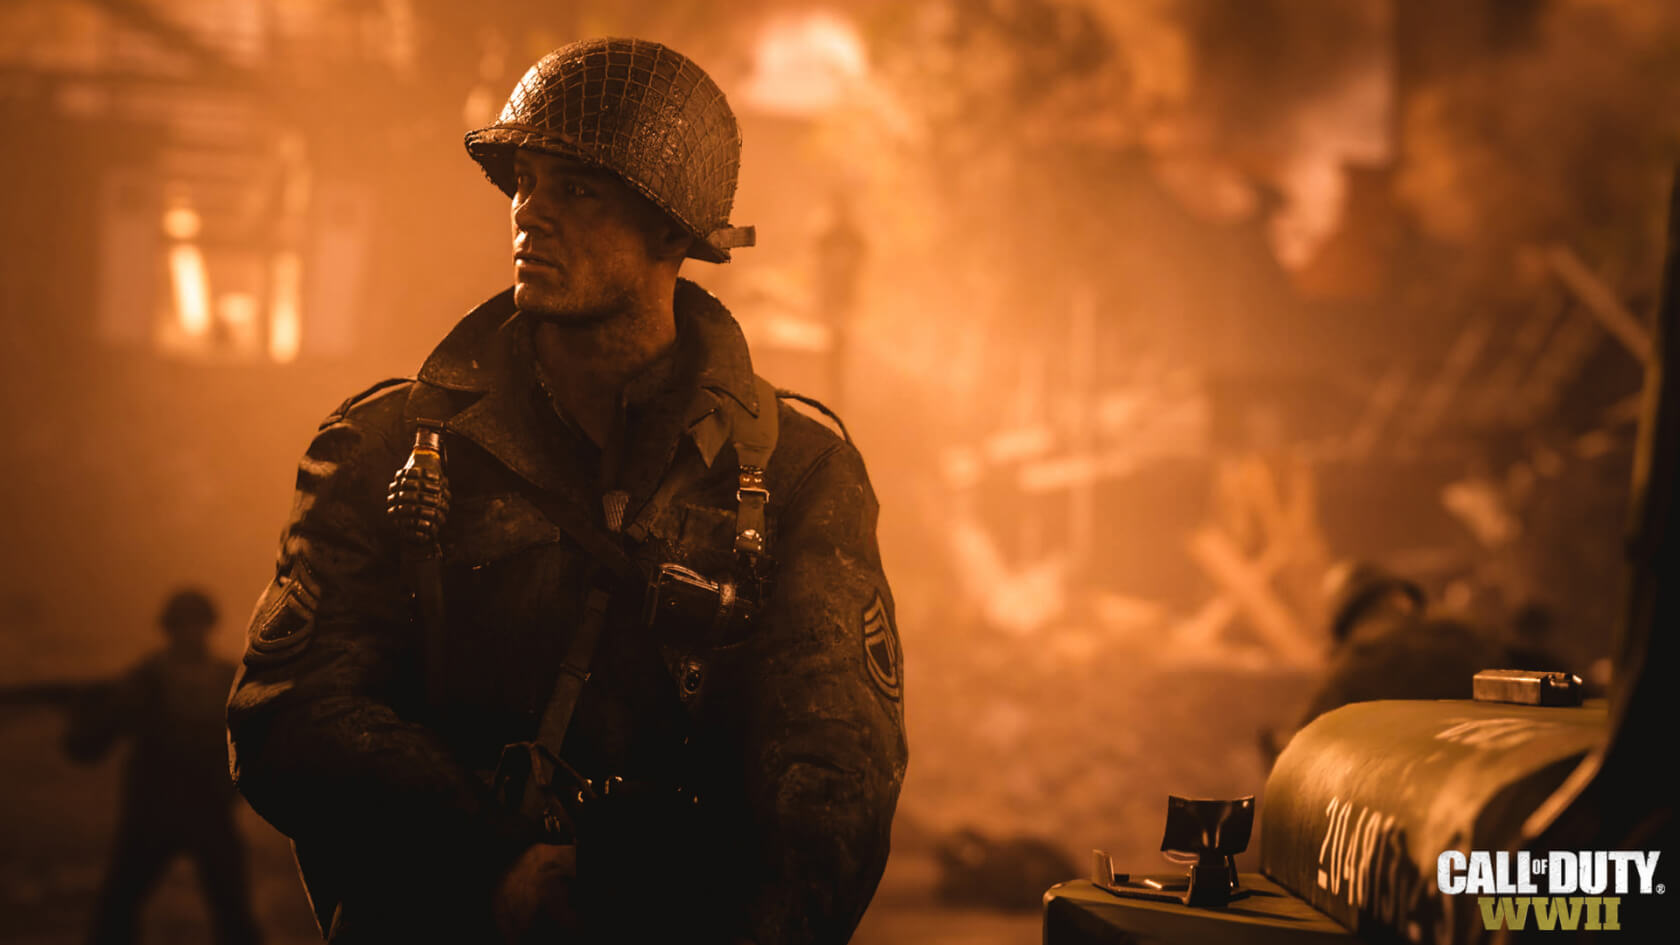 Here is what is coming in the first Call of Duty: WWII DLC